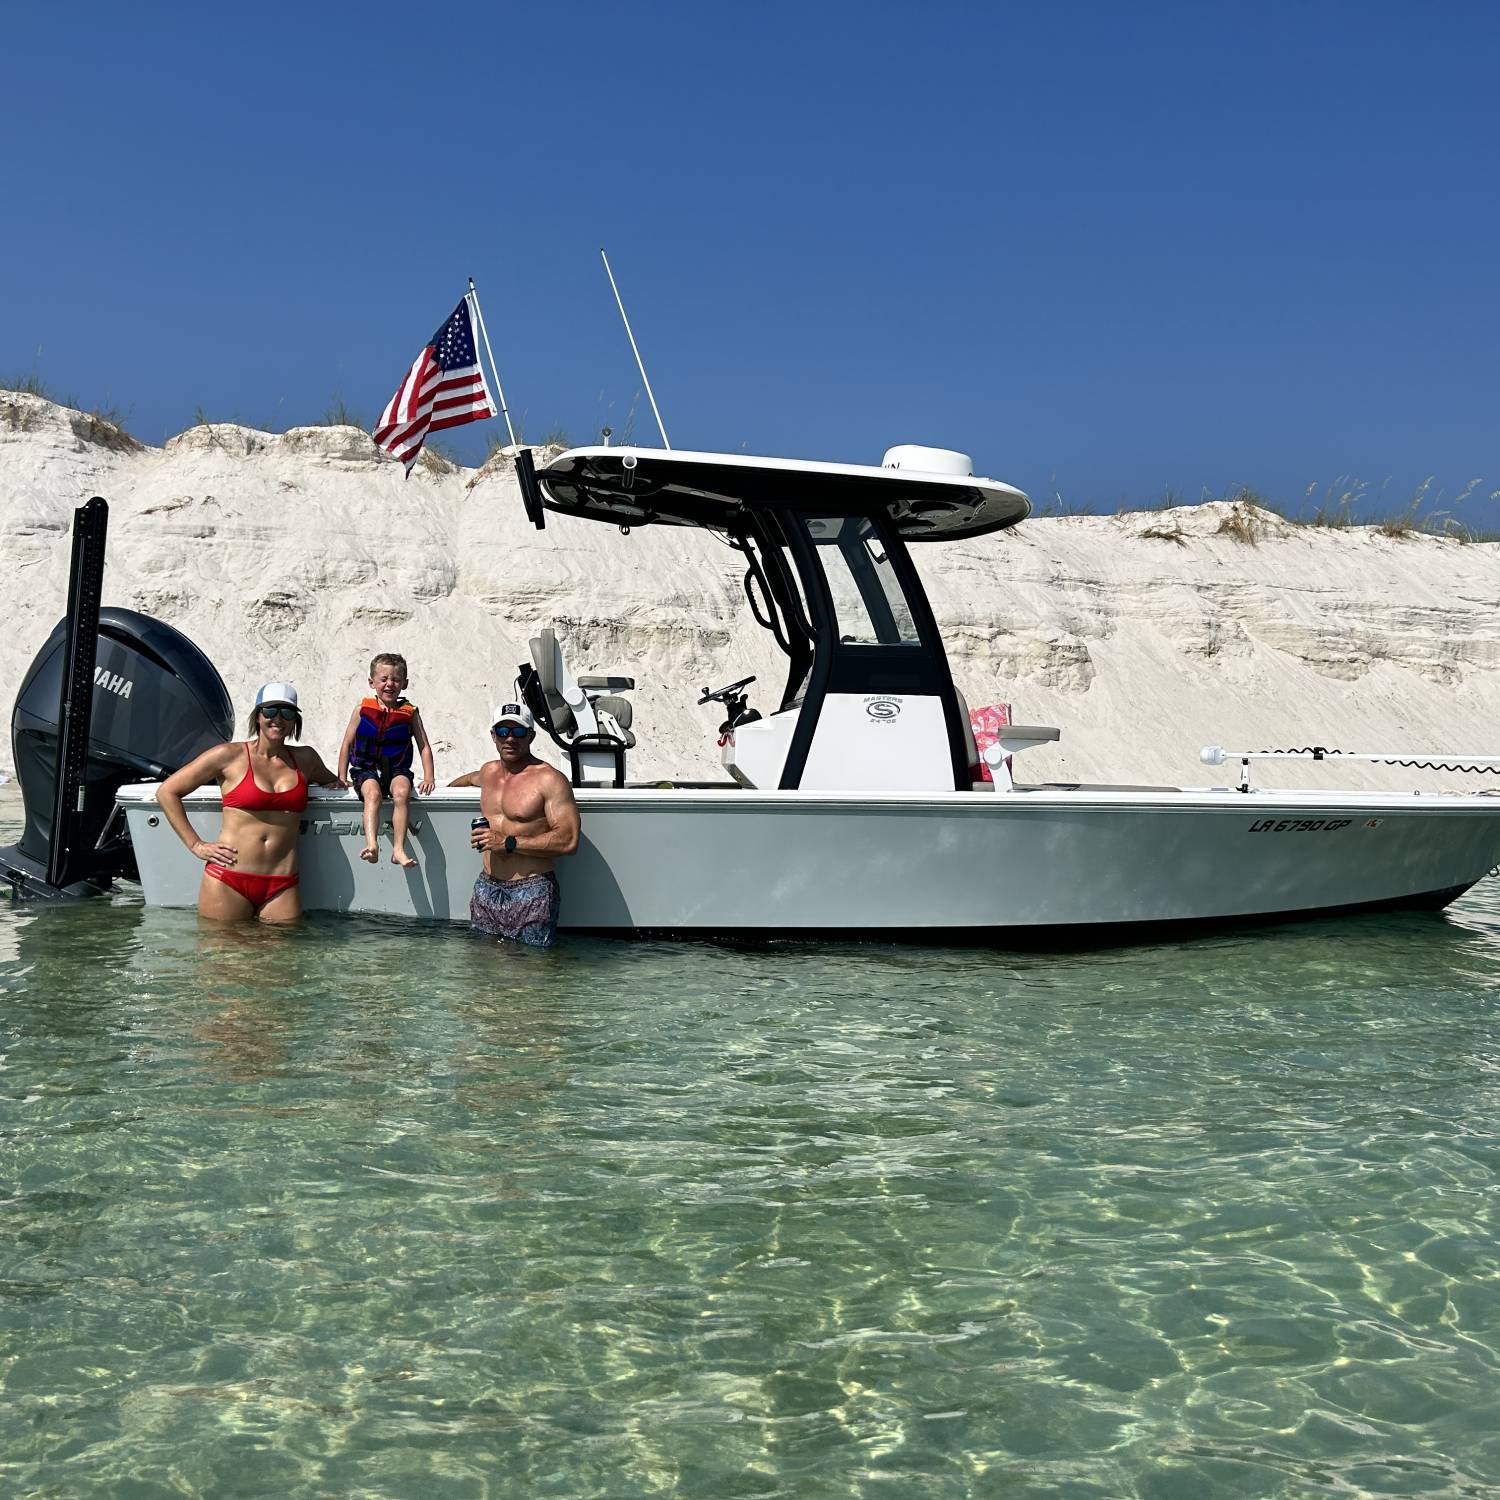 Family enjoying the day at the sand dunes near Fort McRae. This boat does it all